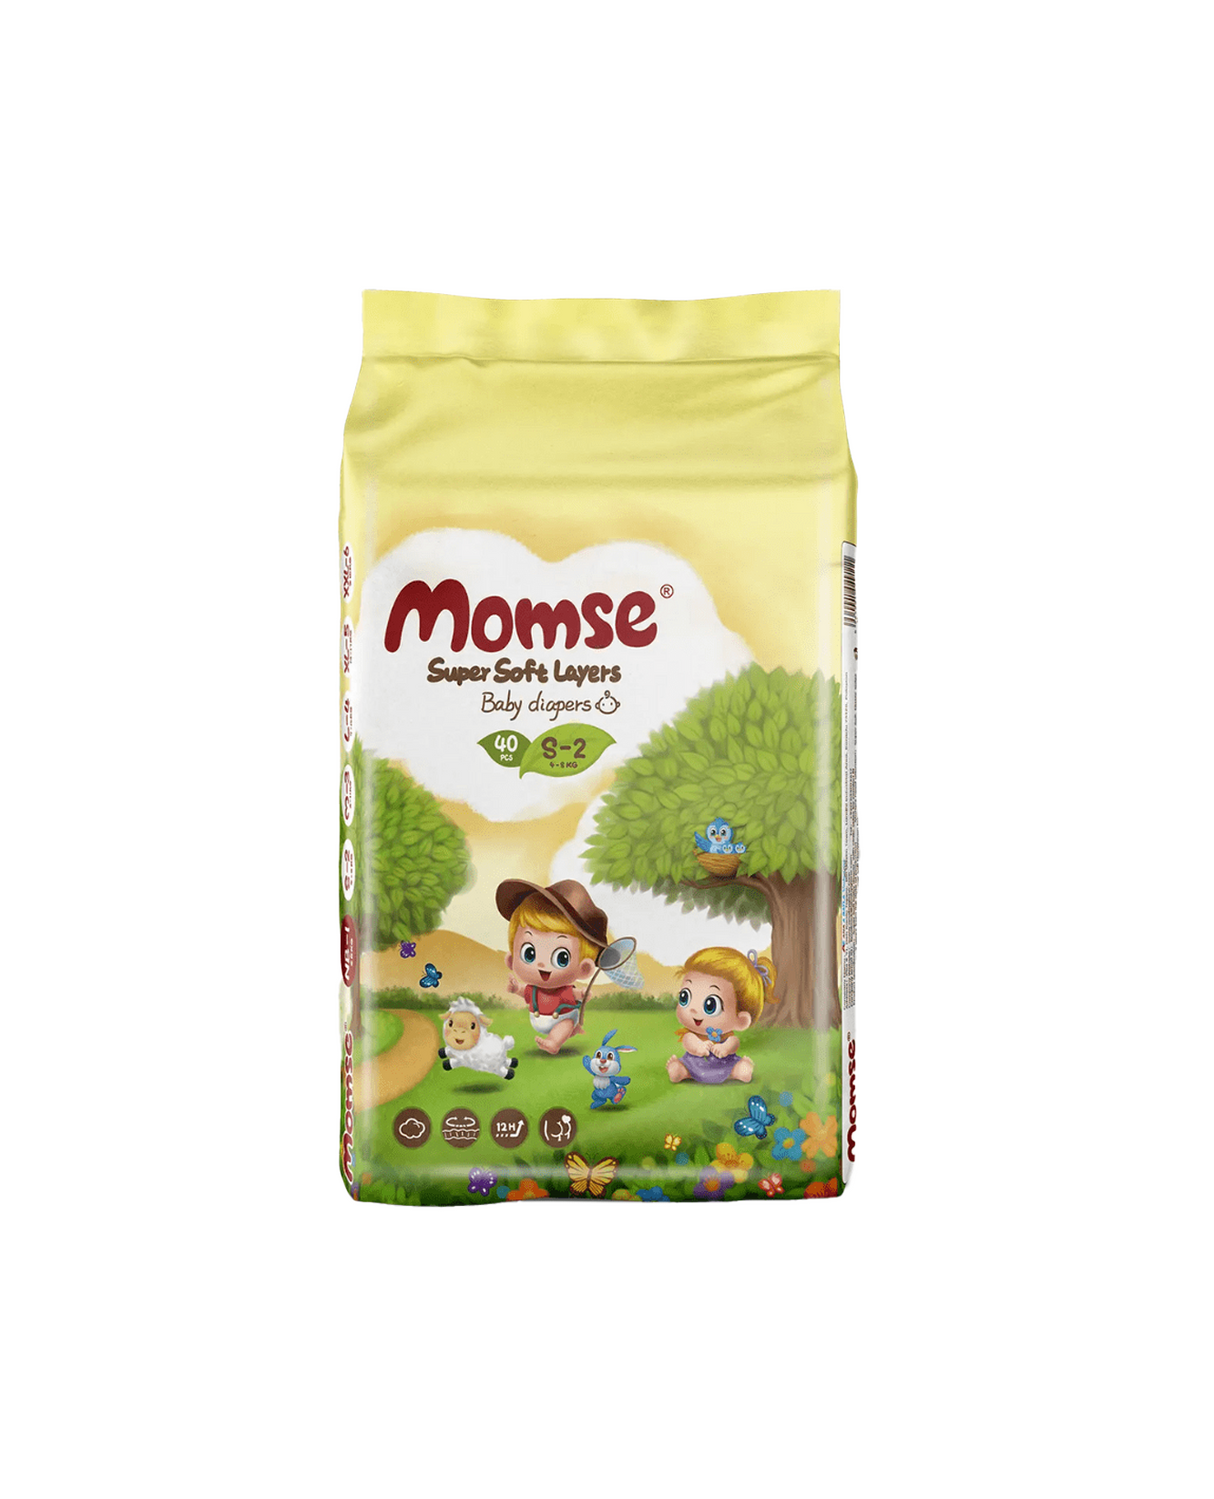 momse diapers economy pack s-2 40pc